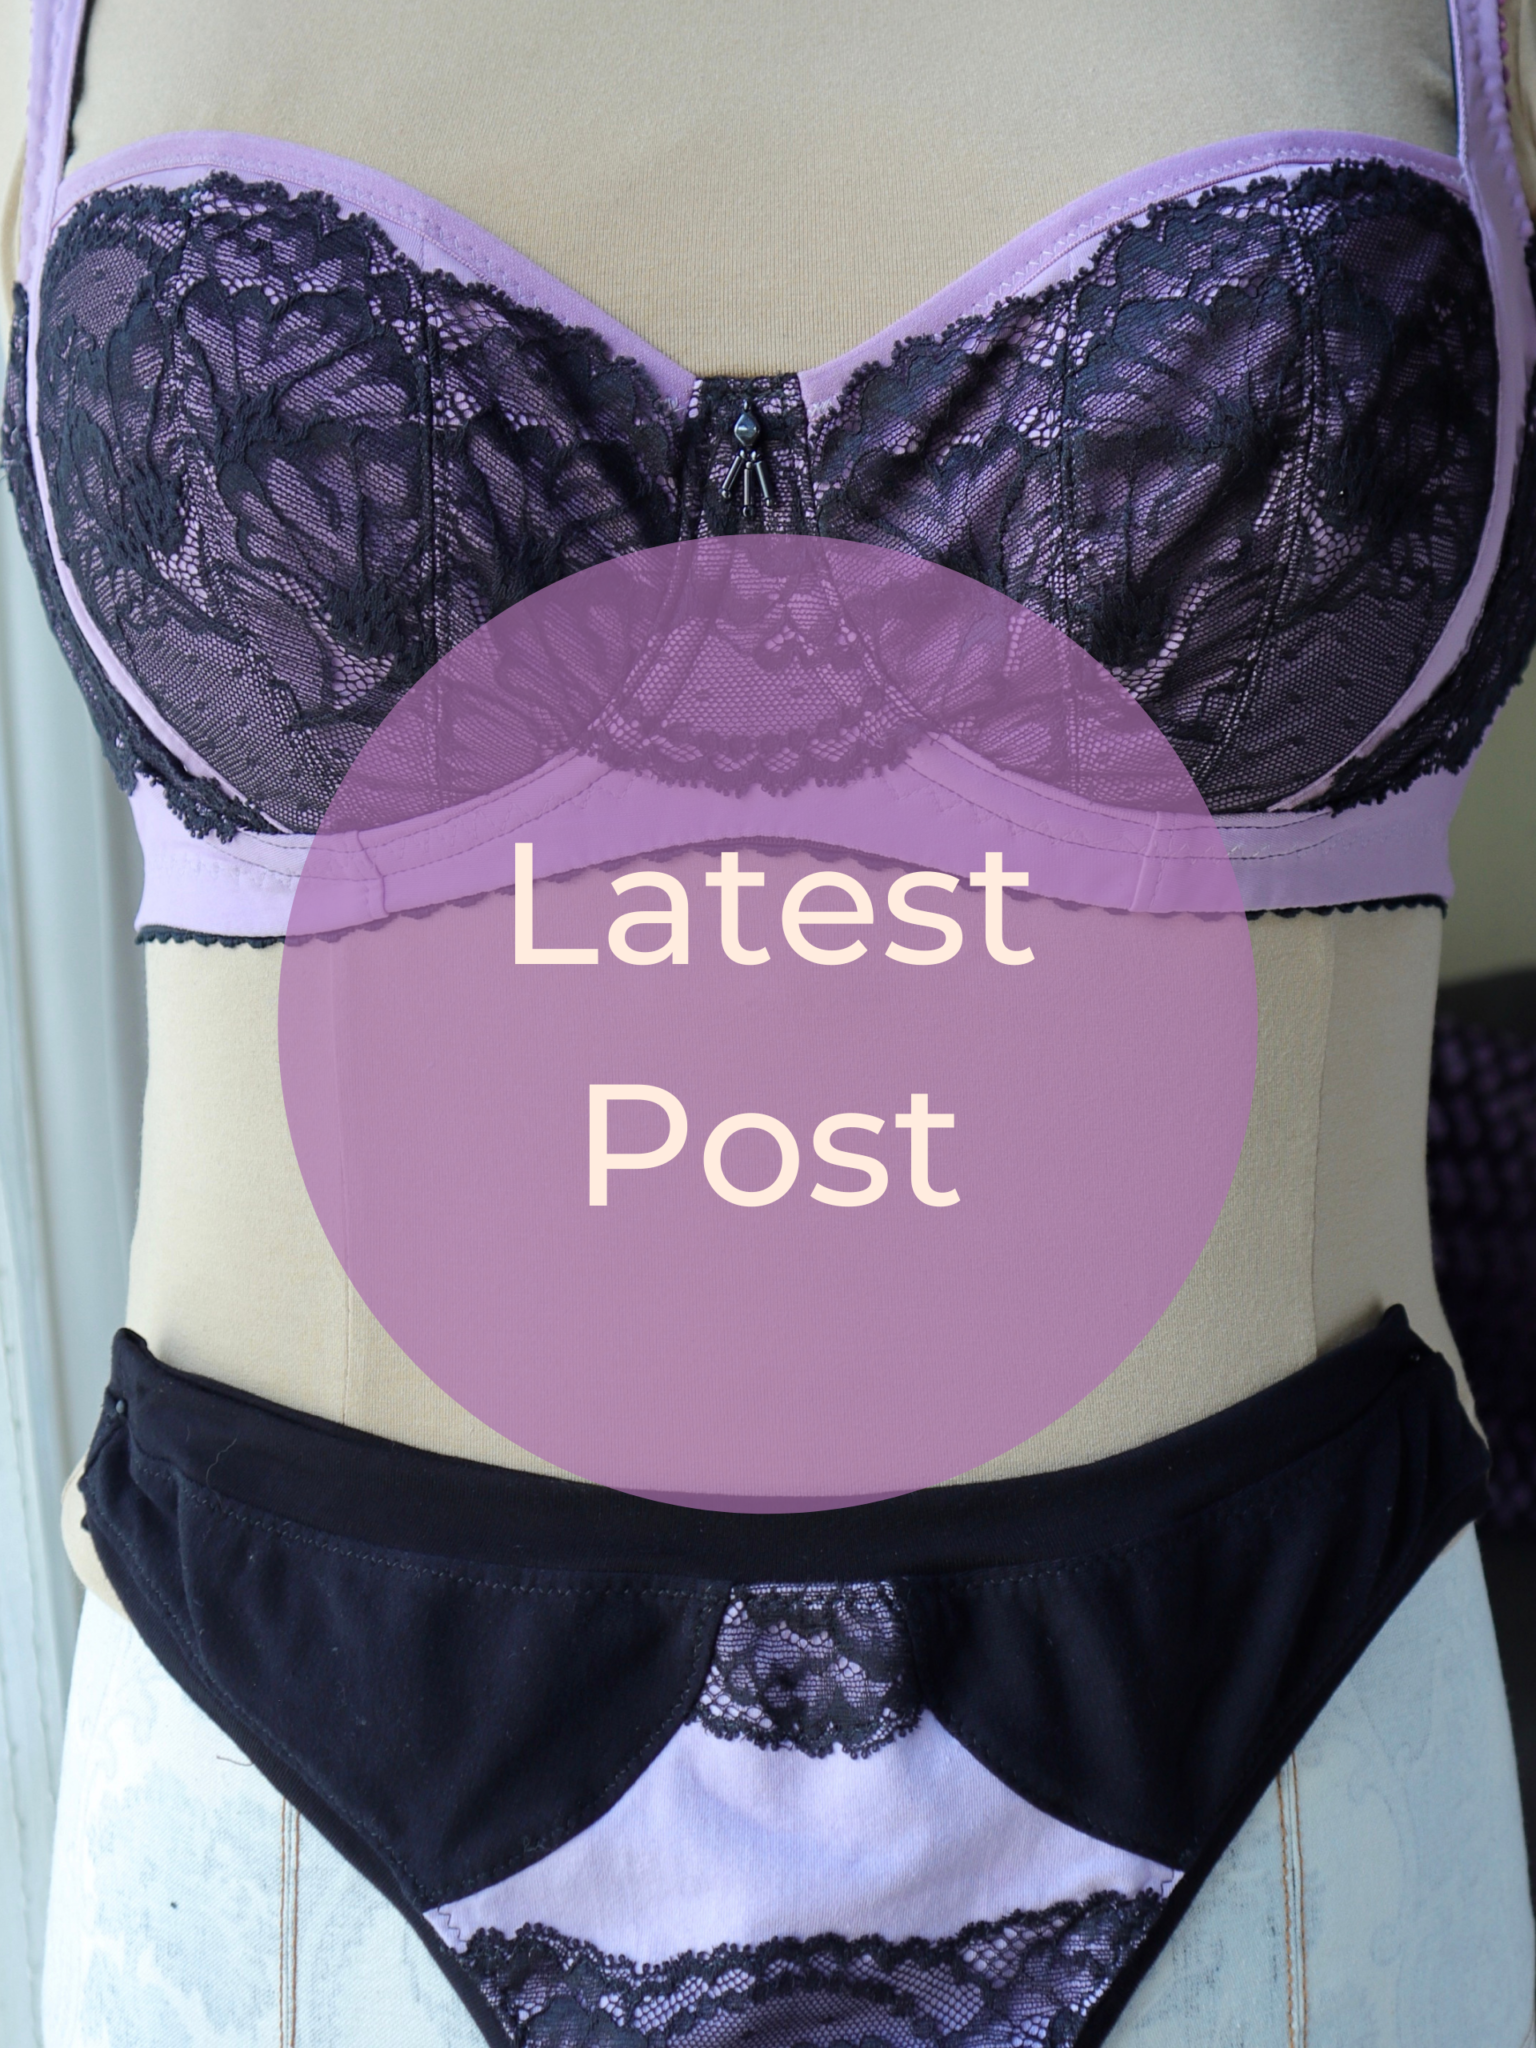 Close up of purple bra and underwear with black lace. A purple circle in the centre reads 'Latest Post'.